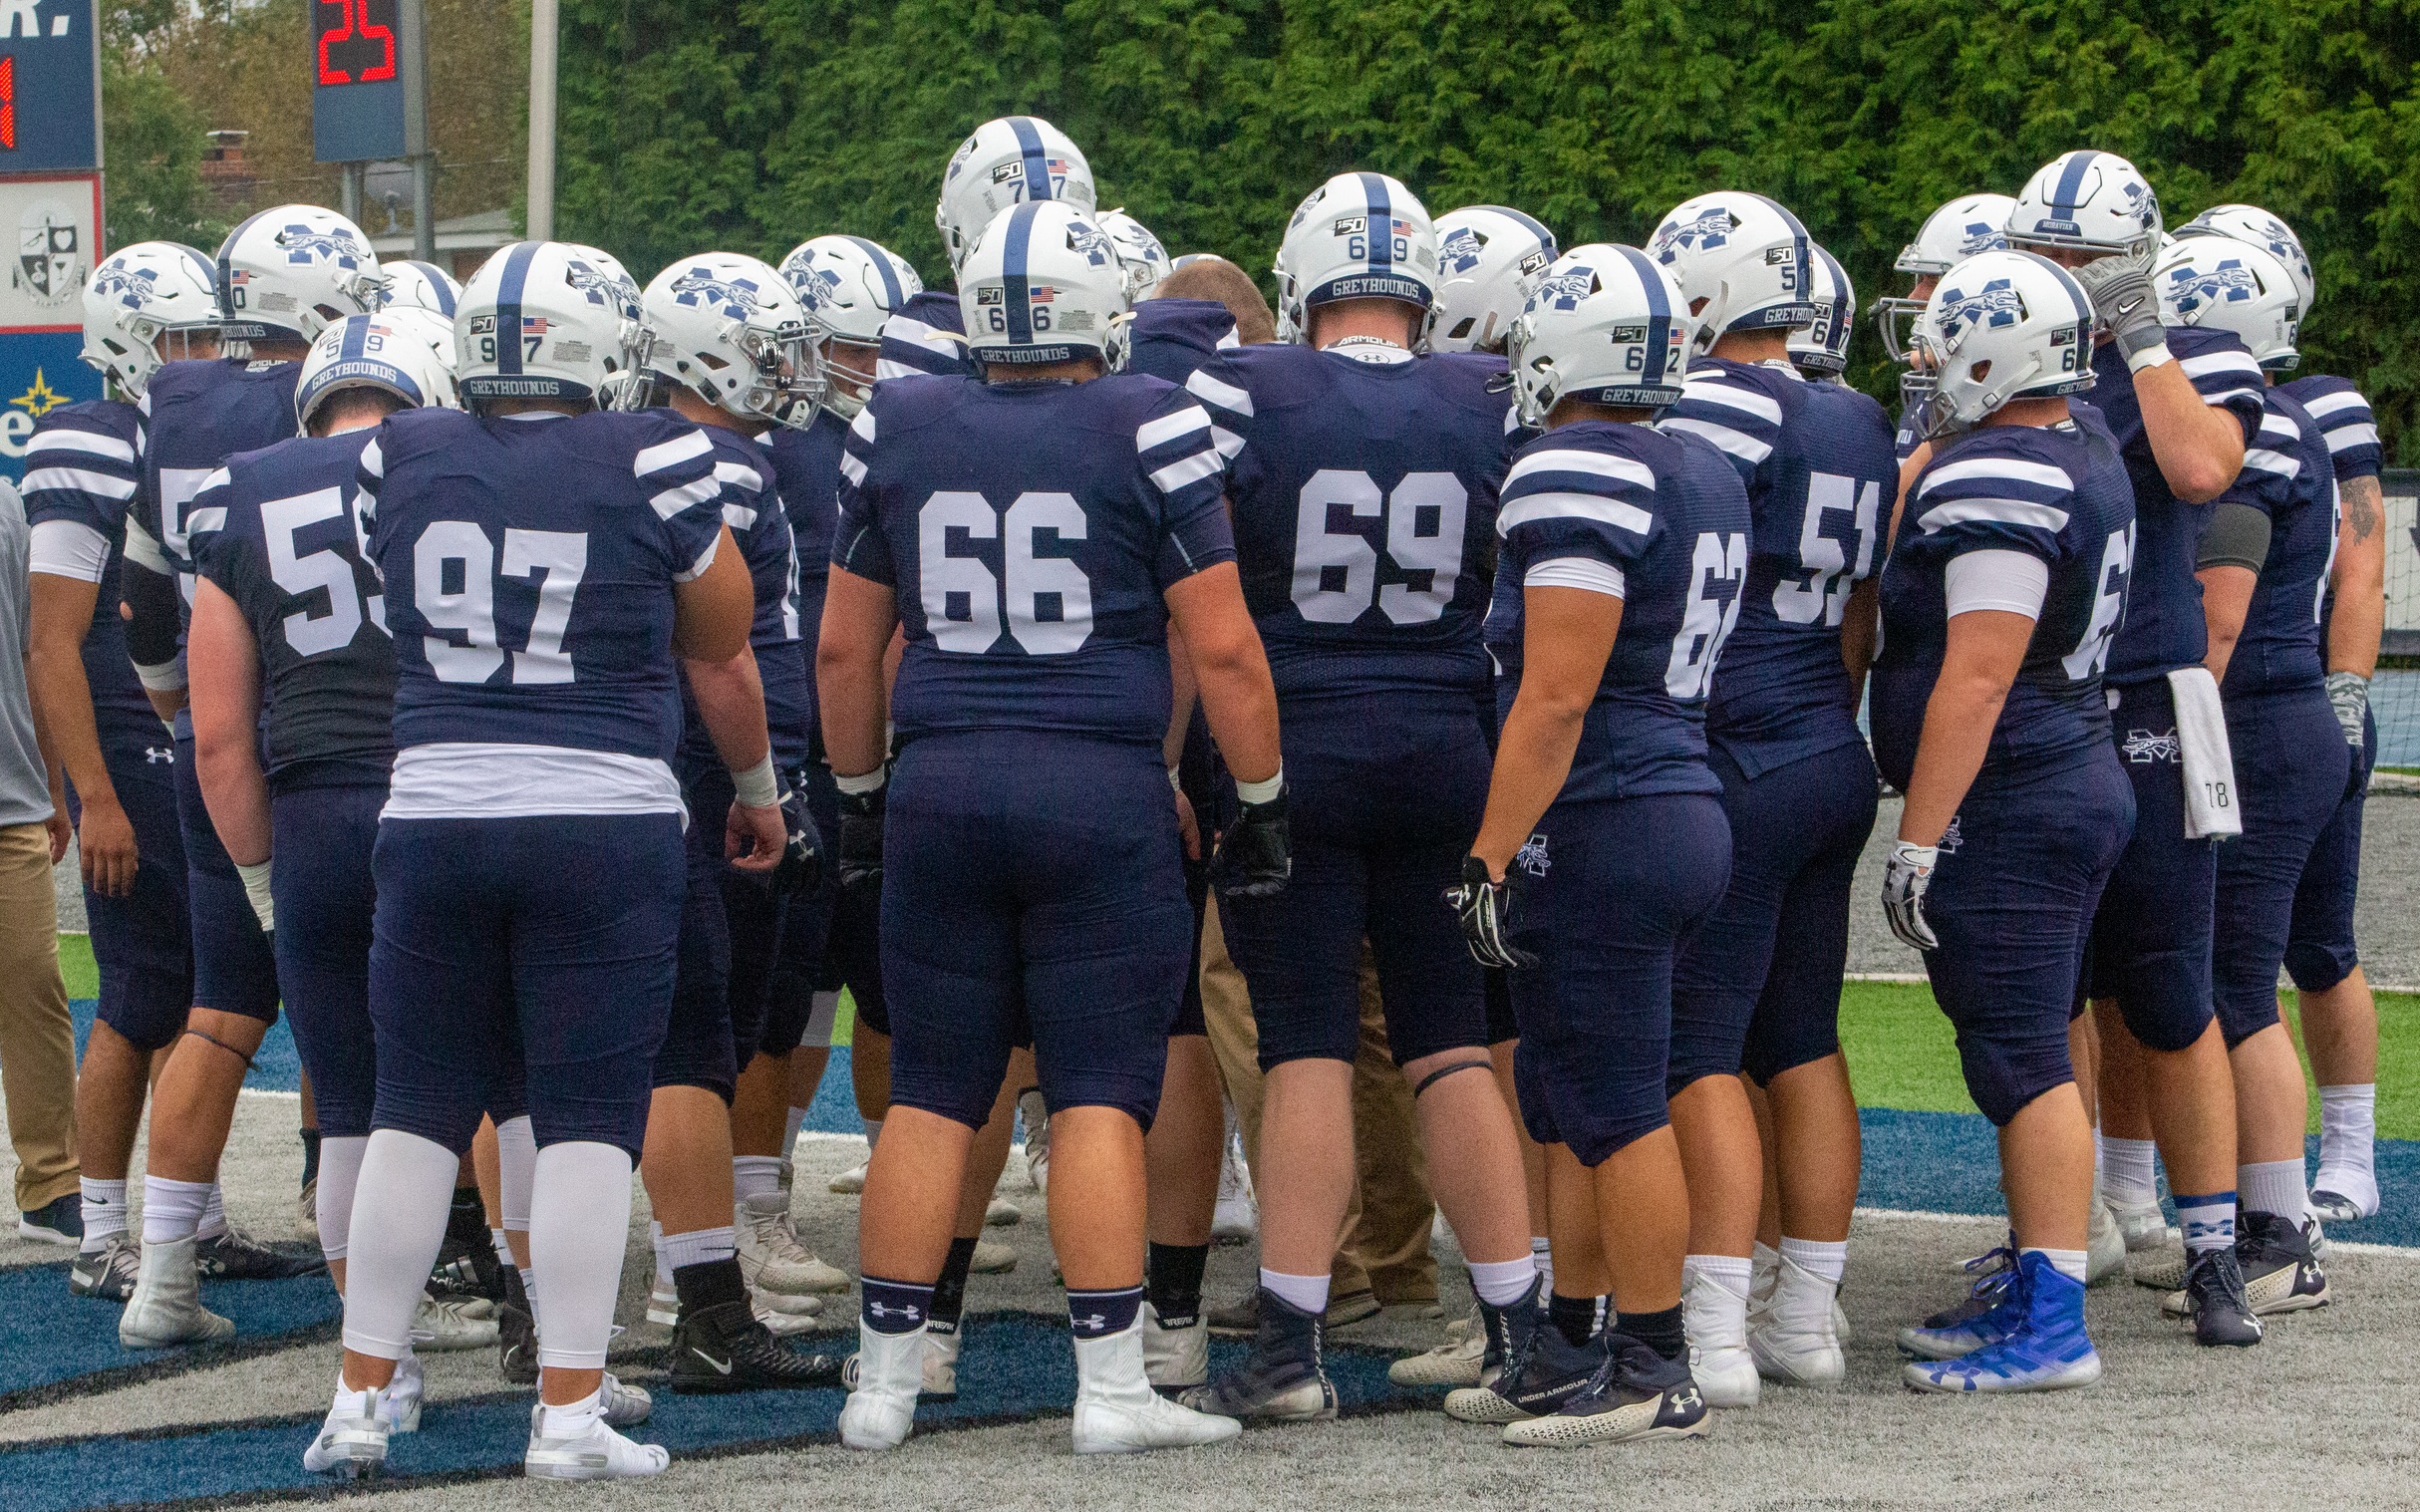 The Greyhounds huddle on Rocco Calvo Field prior to a game in 2019.